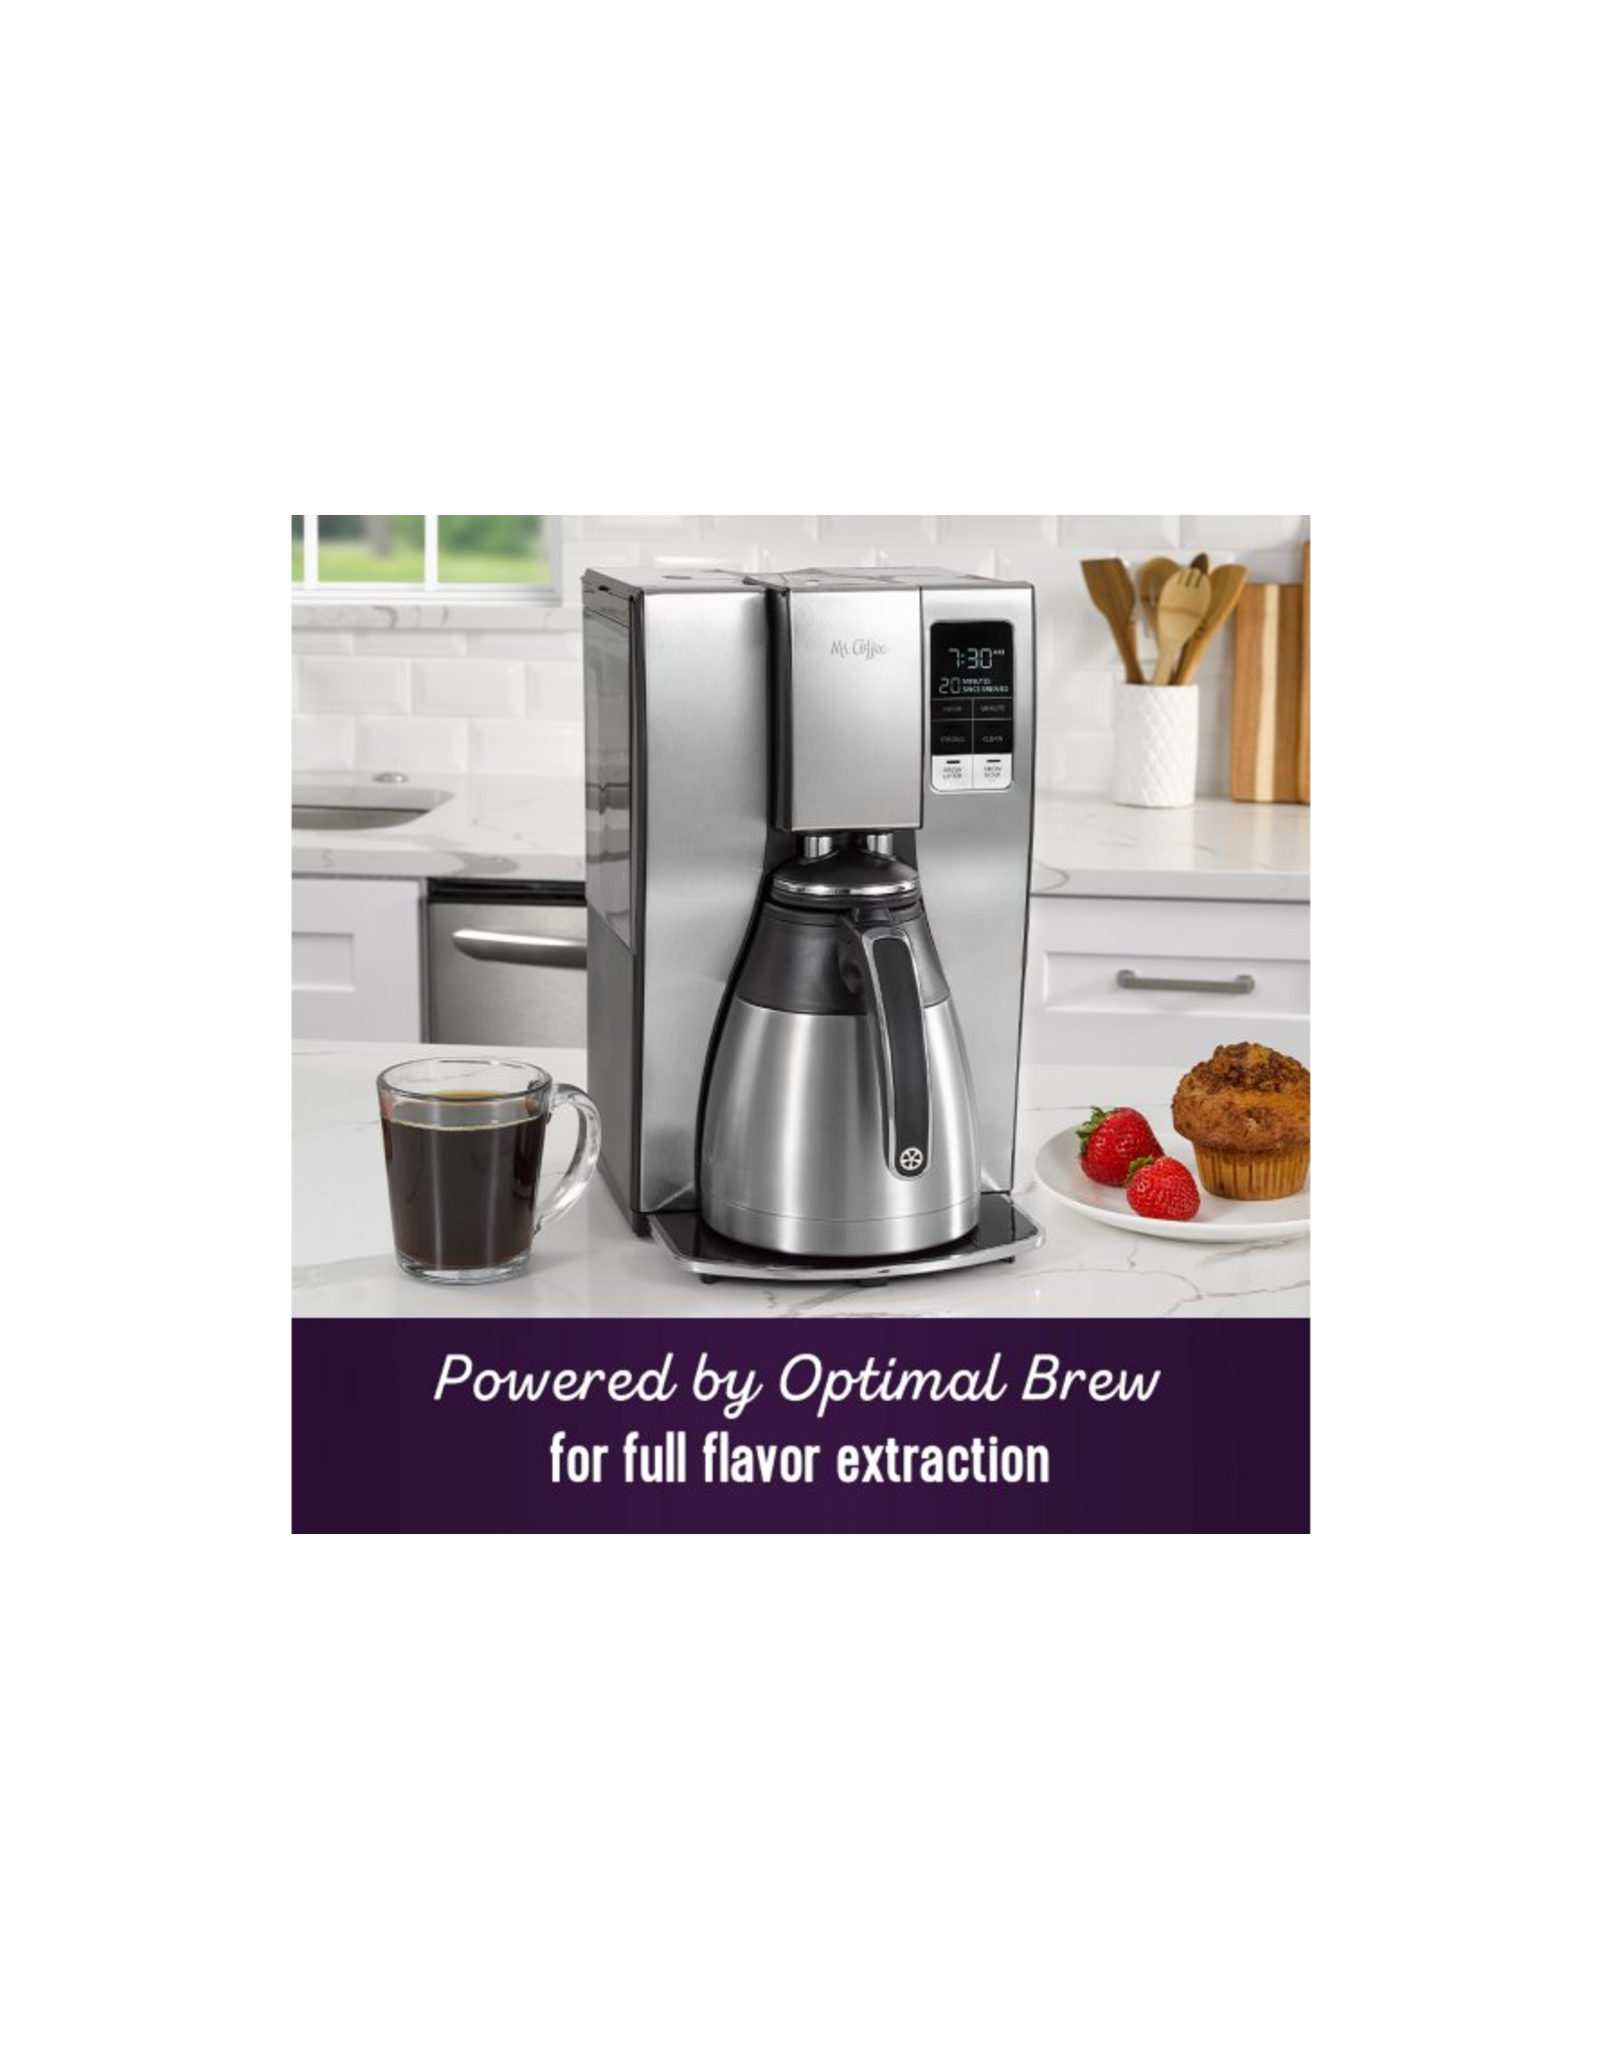 Mr. Coffee - 10-Cup Coffee Maker with Thermal Carafe - Stainless